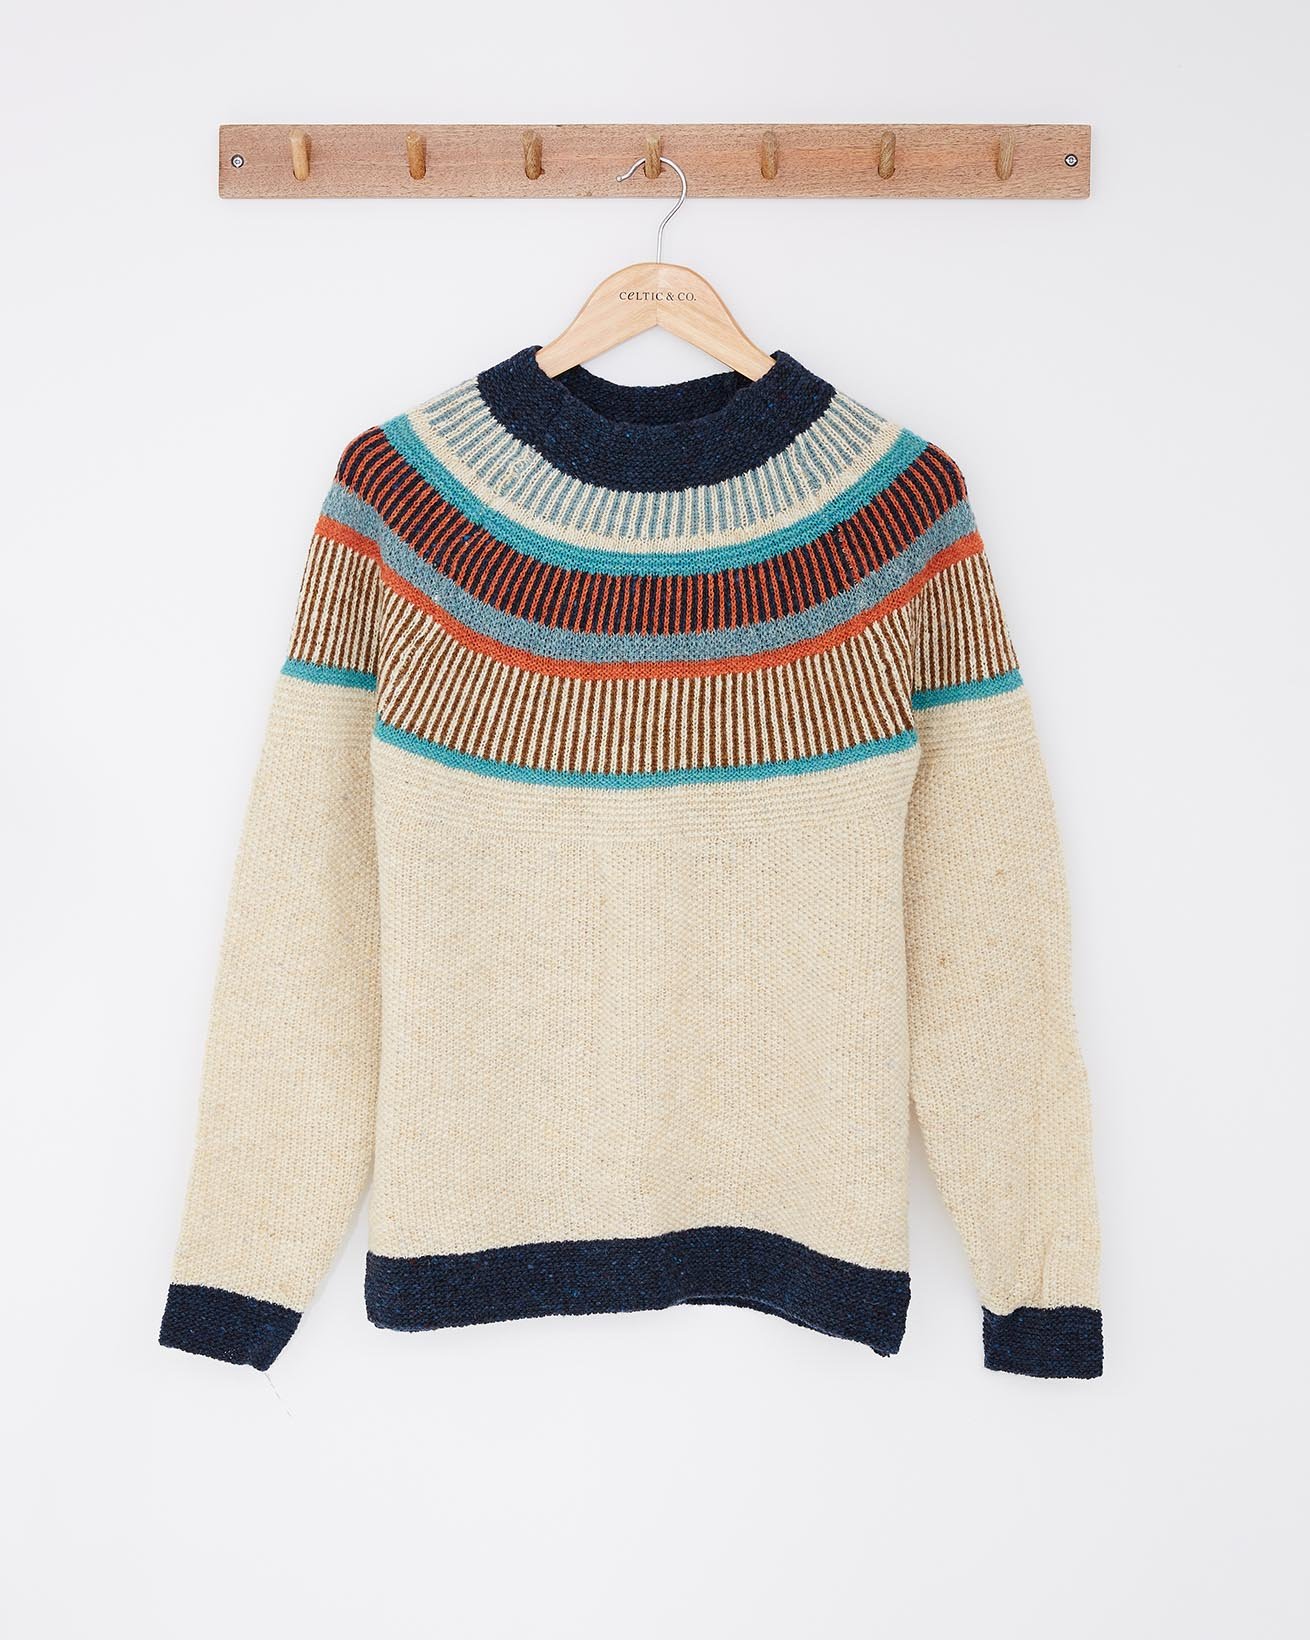 2817 - statement donegal jumper  oatmeal  m front.jpg